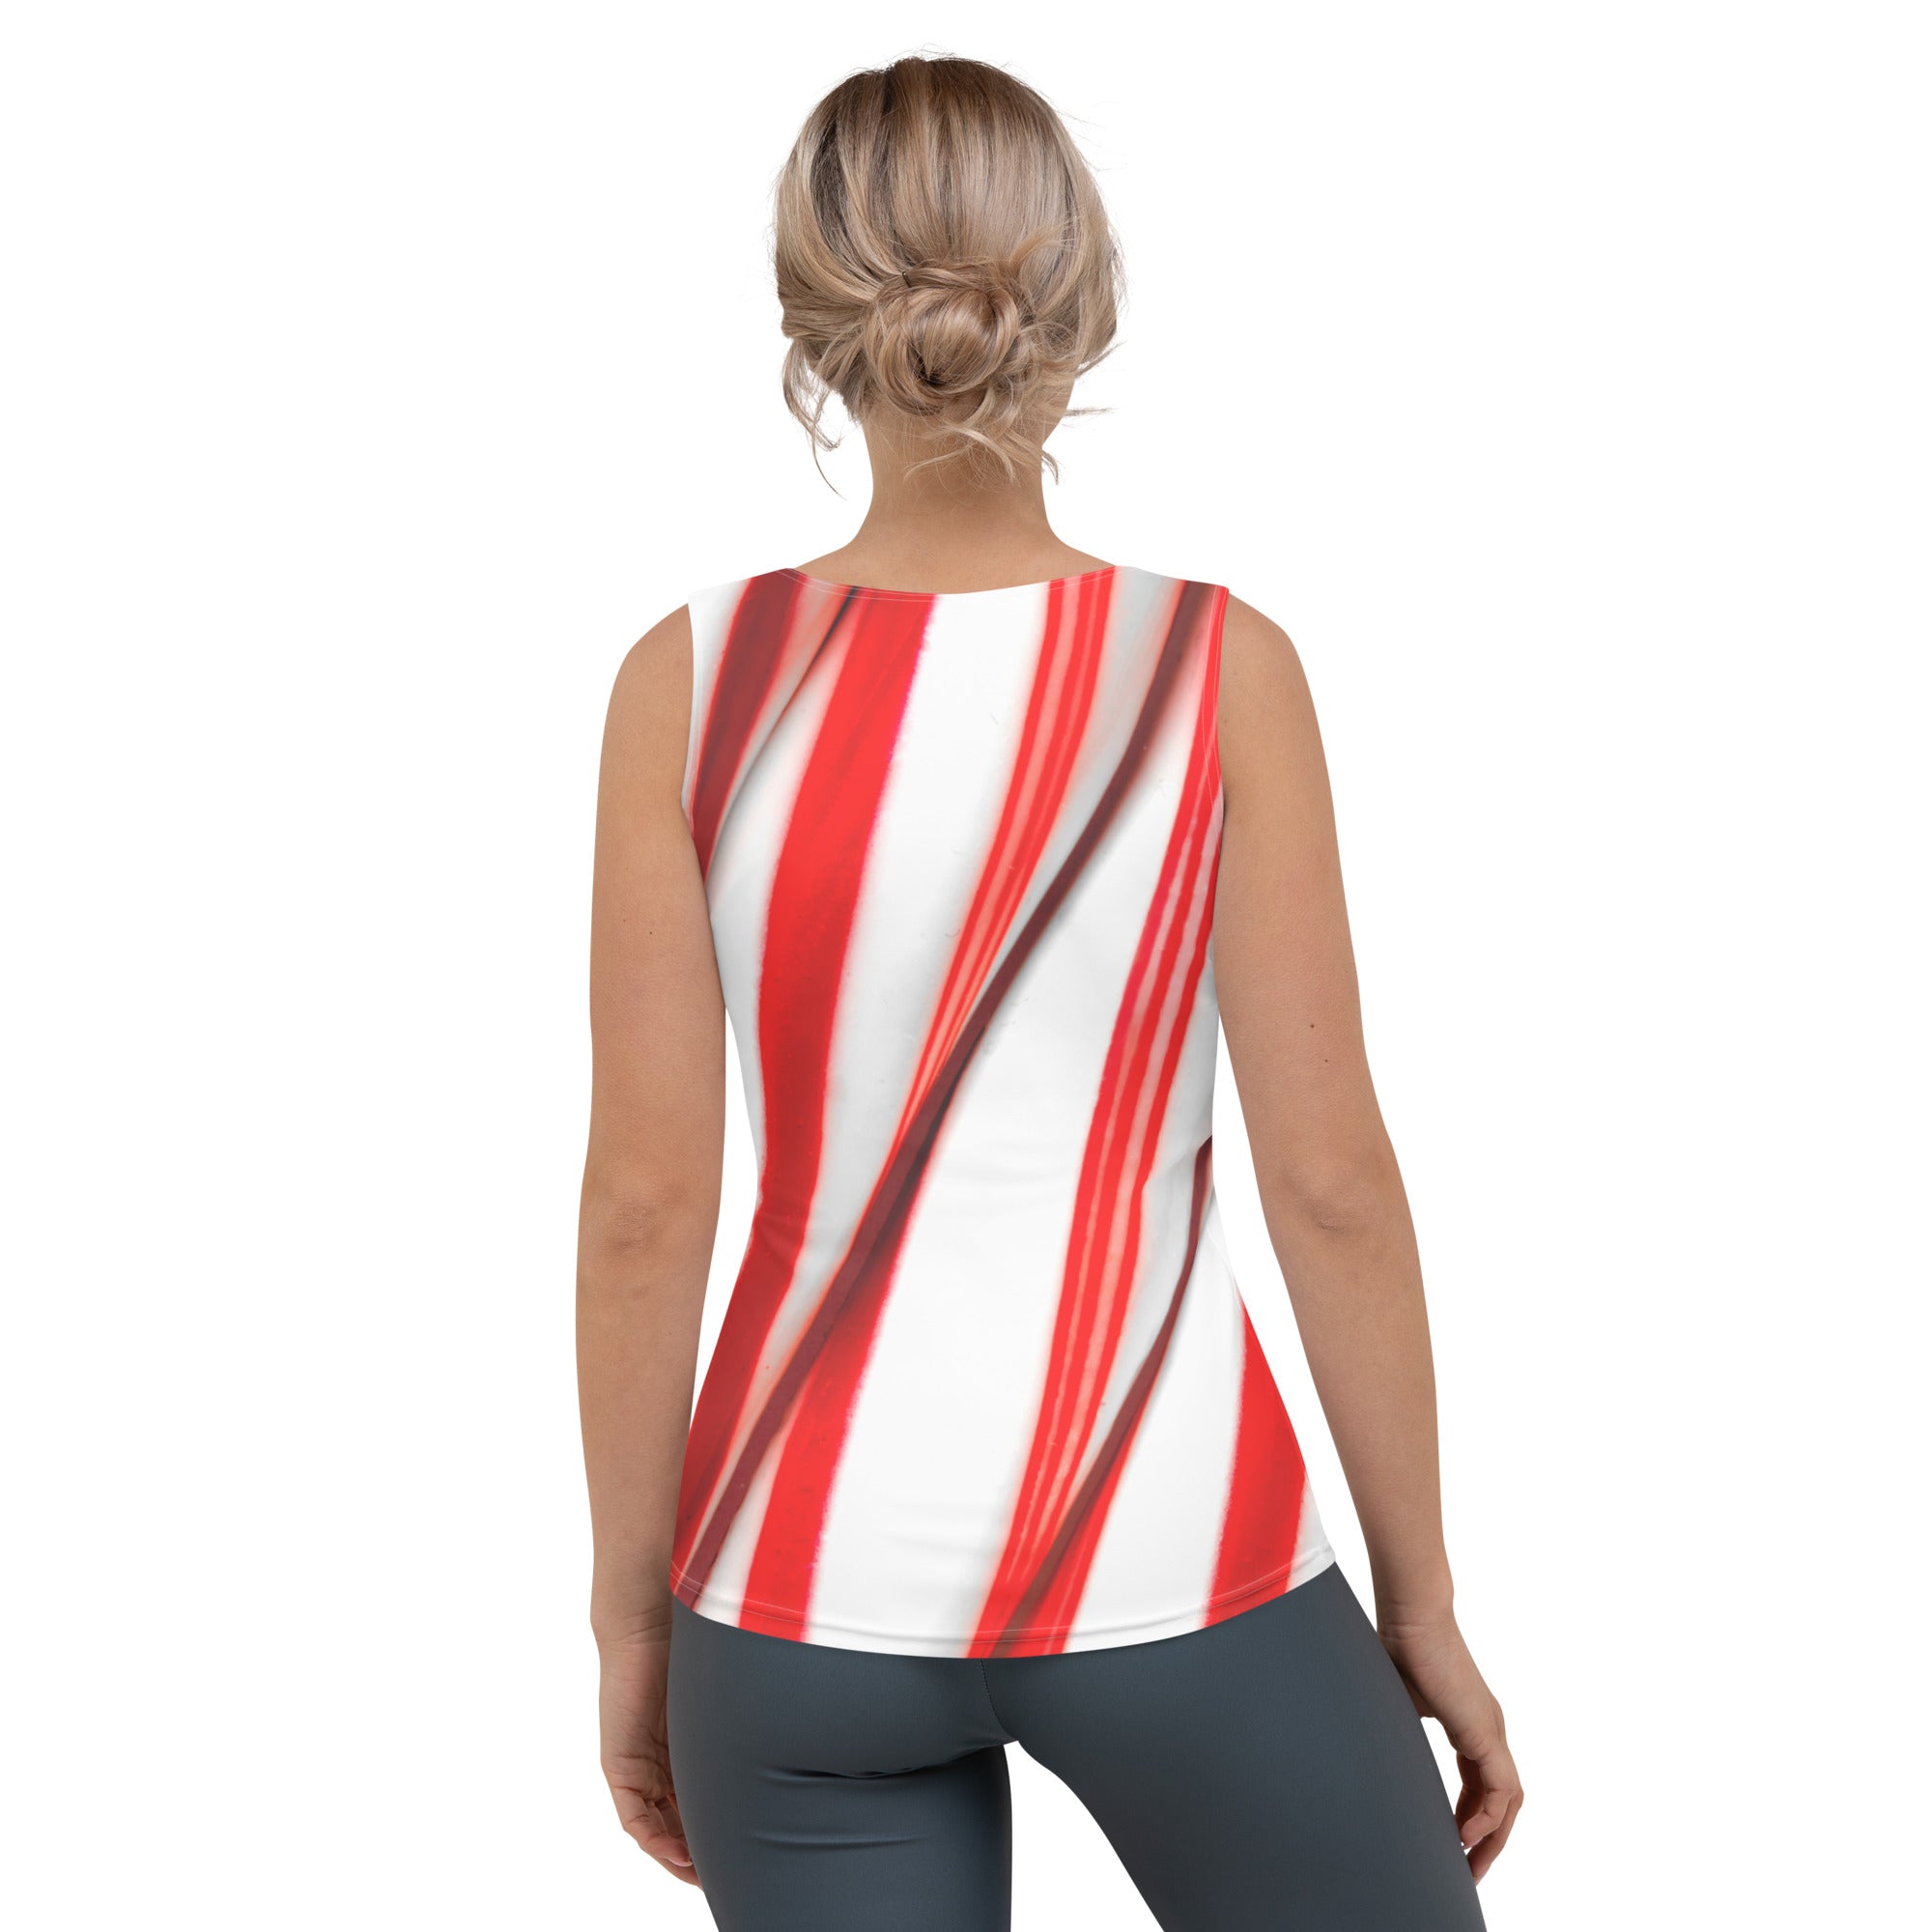 3D Candy Cane Tank Top